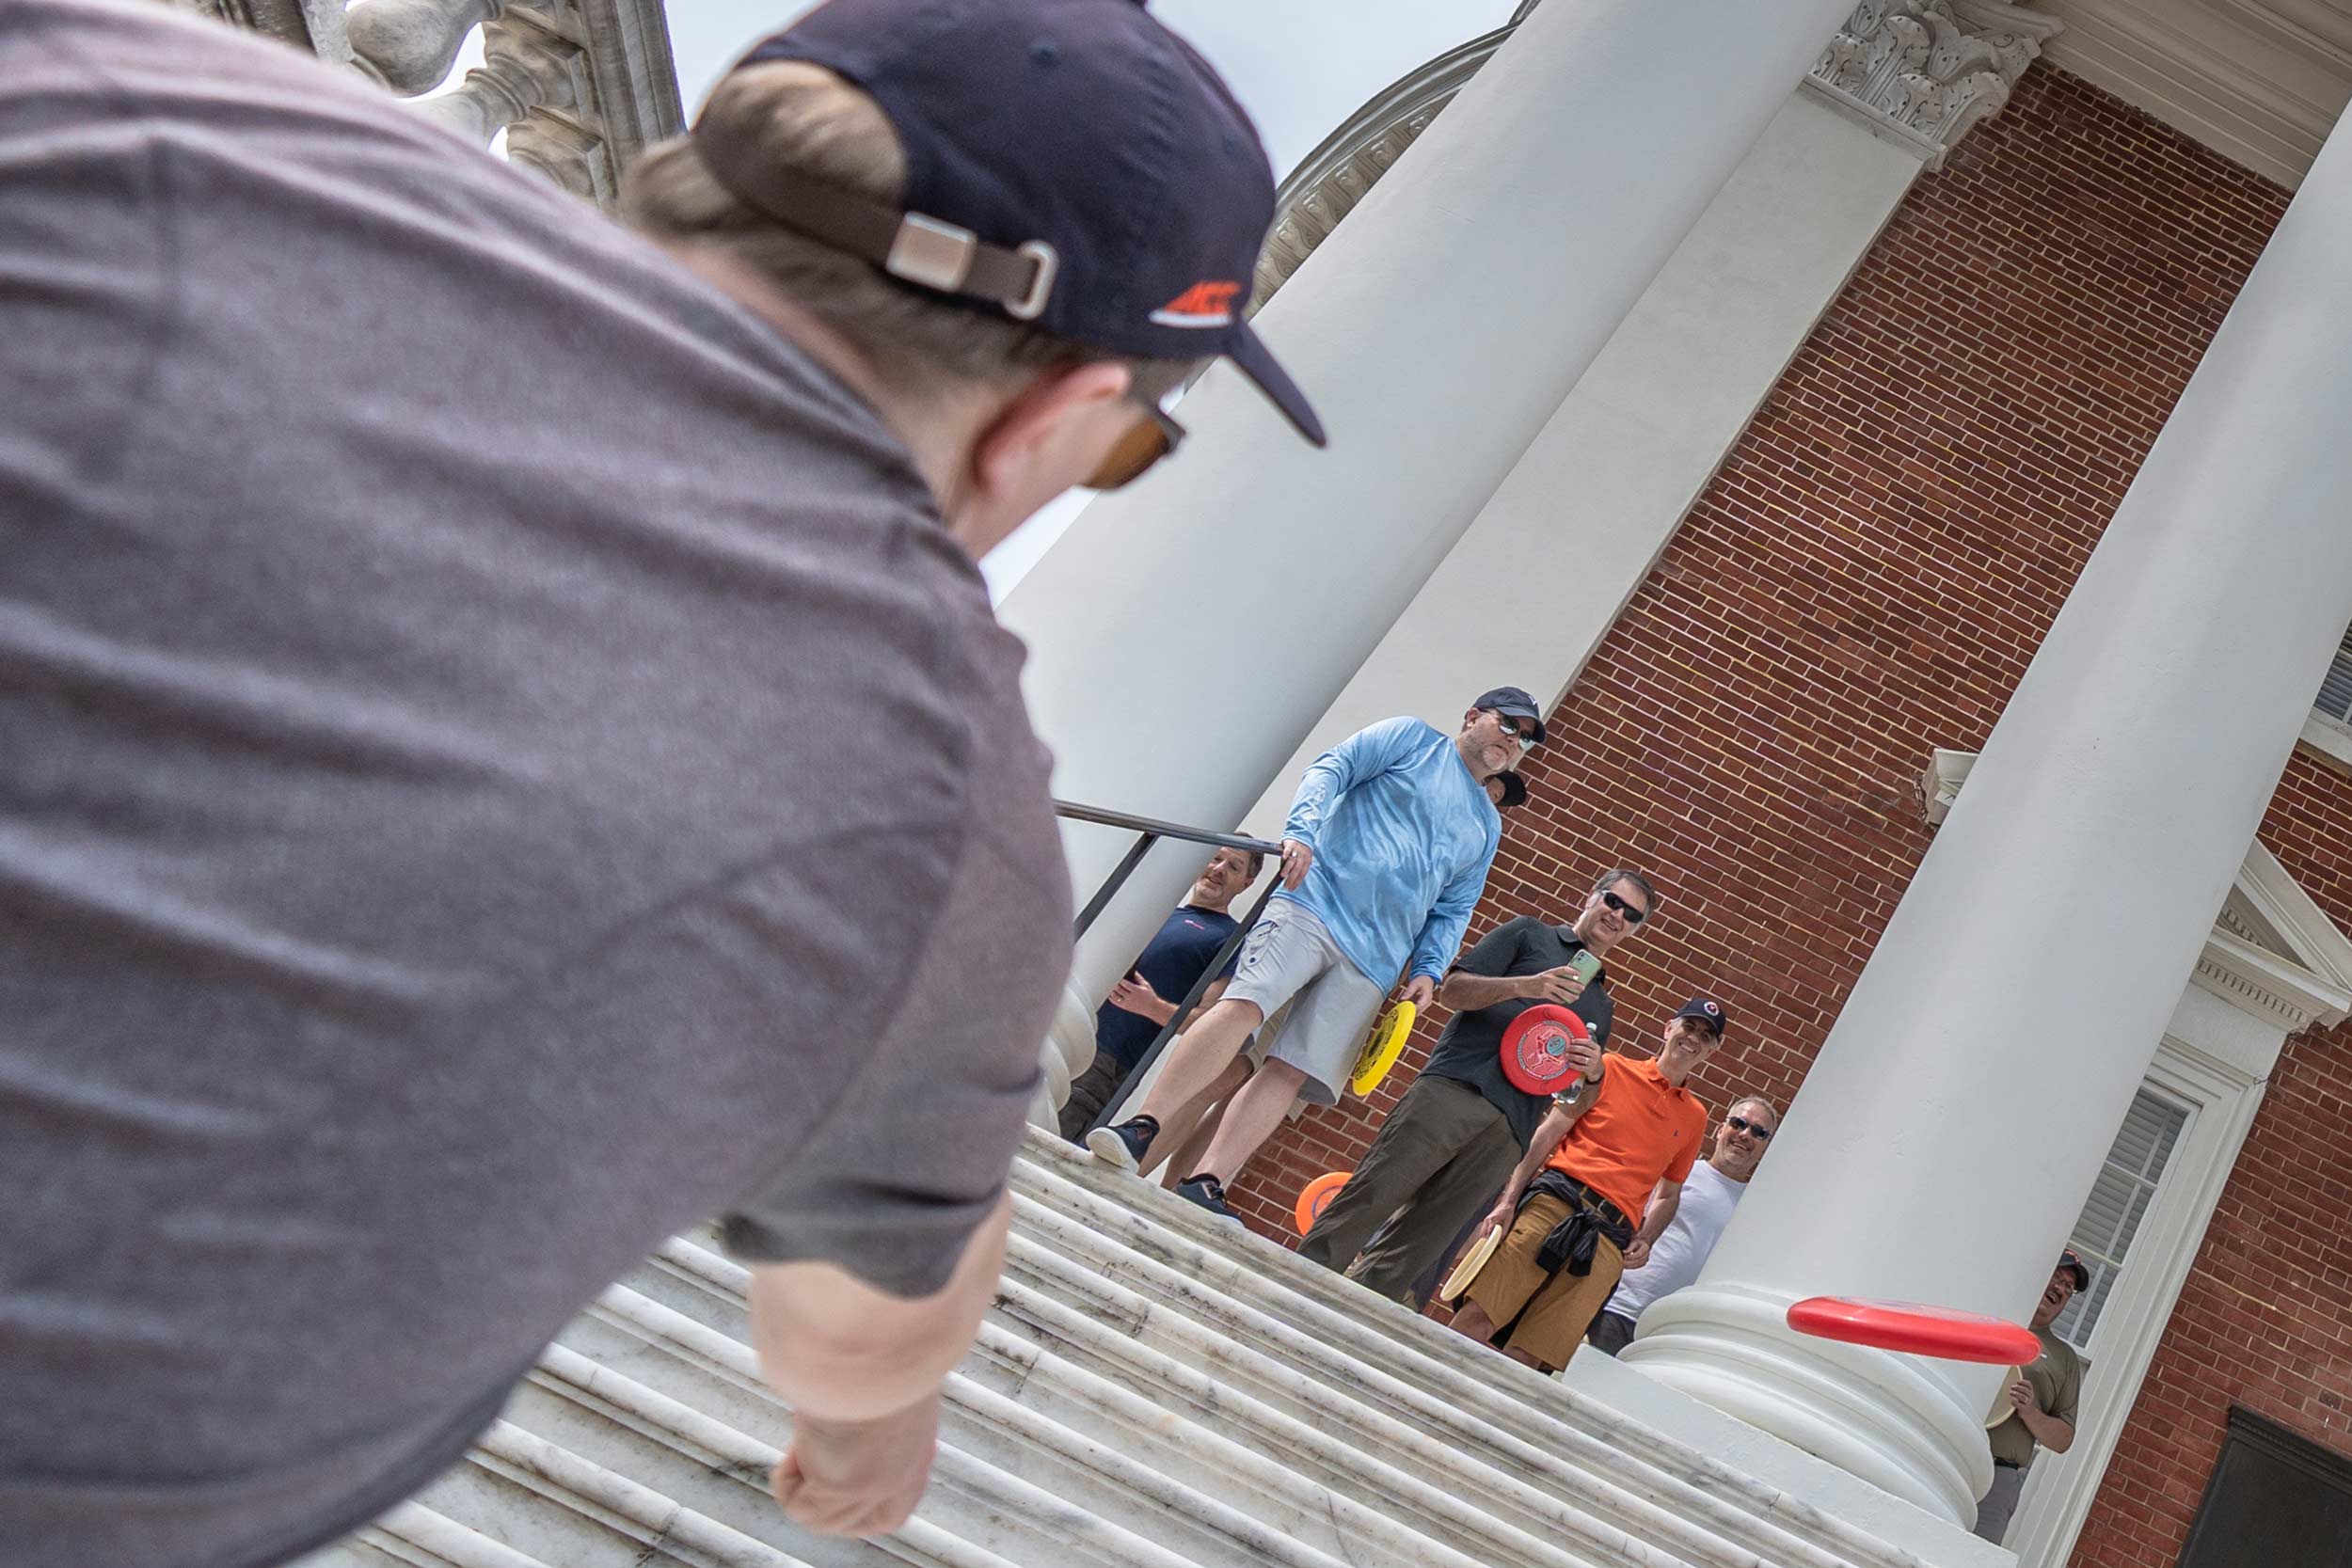 C.J. Takacs watching his frisbee go up towards the Rotunda from the bottom of the steps